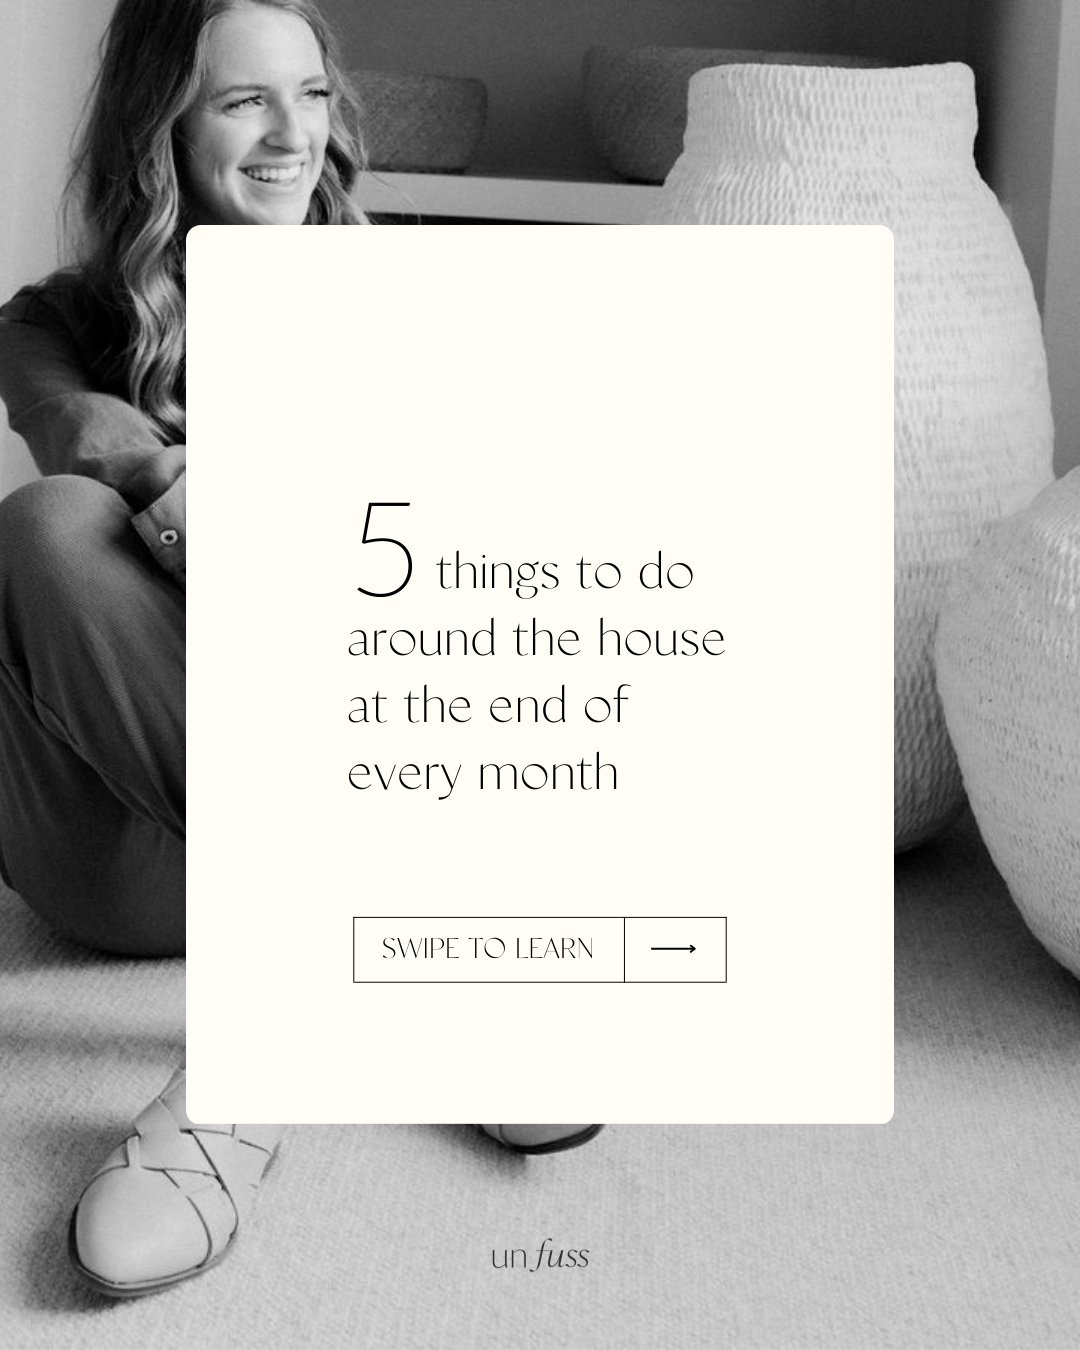 Reduce stress and find peace in your home with this simple monthly decluttering routine! ✨ 

Imagine the satisfaction of decluttering one area, filling a donation box with items no longer needed, and organizing your paperwork. Rotate seasonal items a